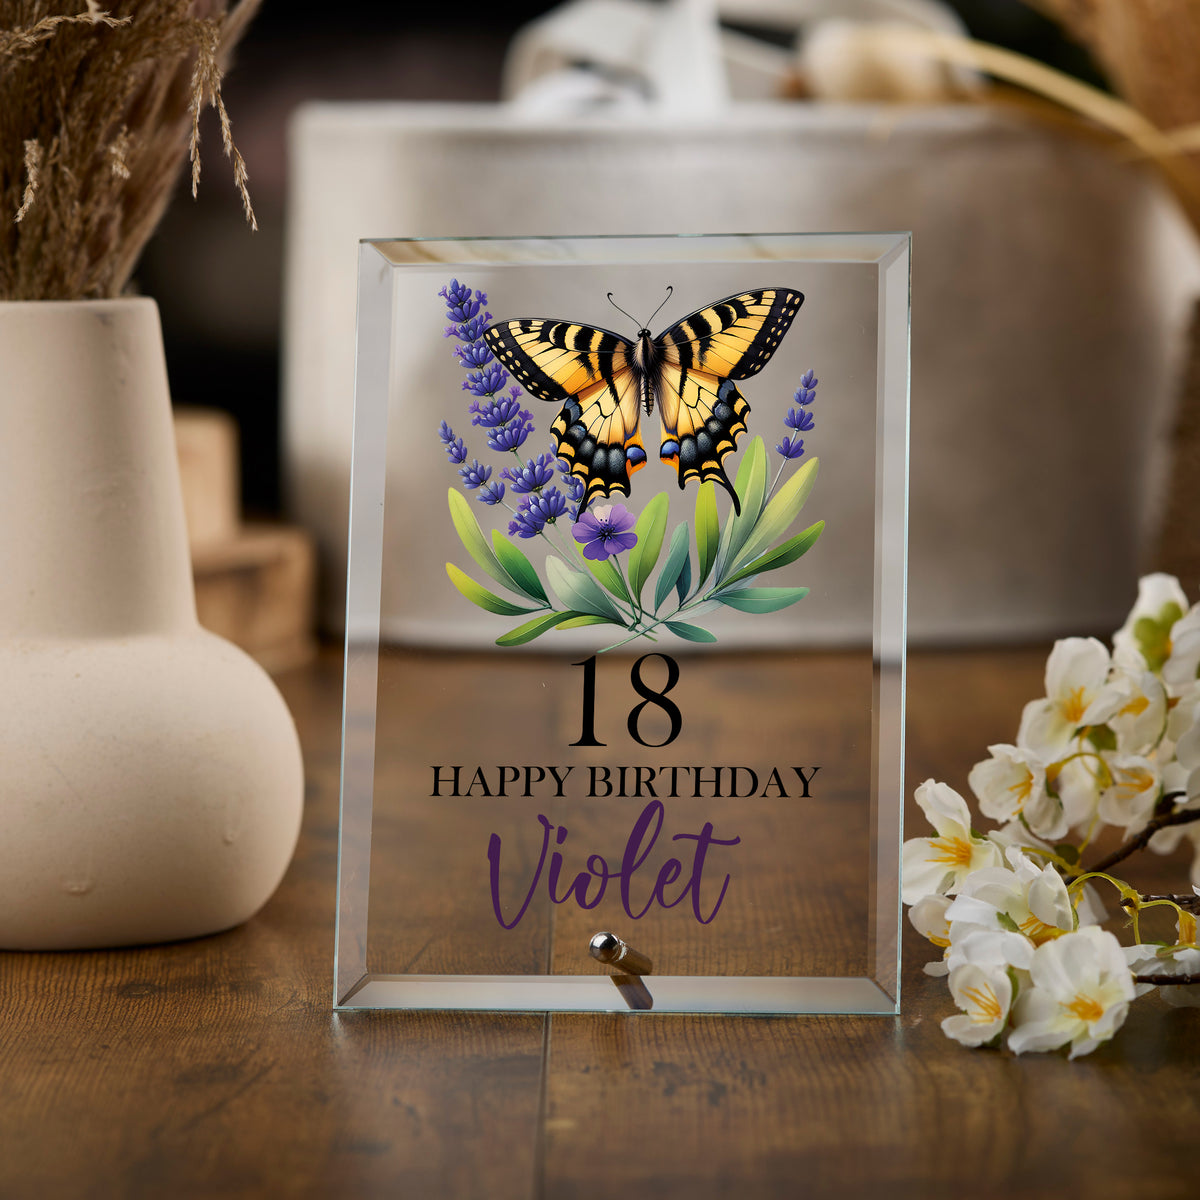 Personalised 18th Birthday Glass Plaque Gift With Butterflies